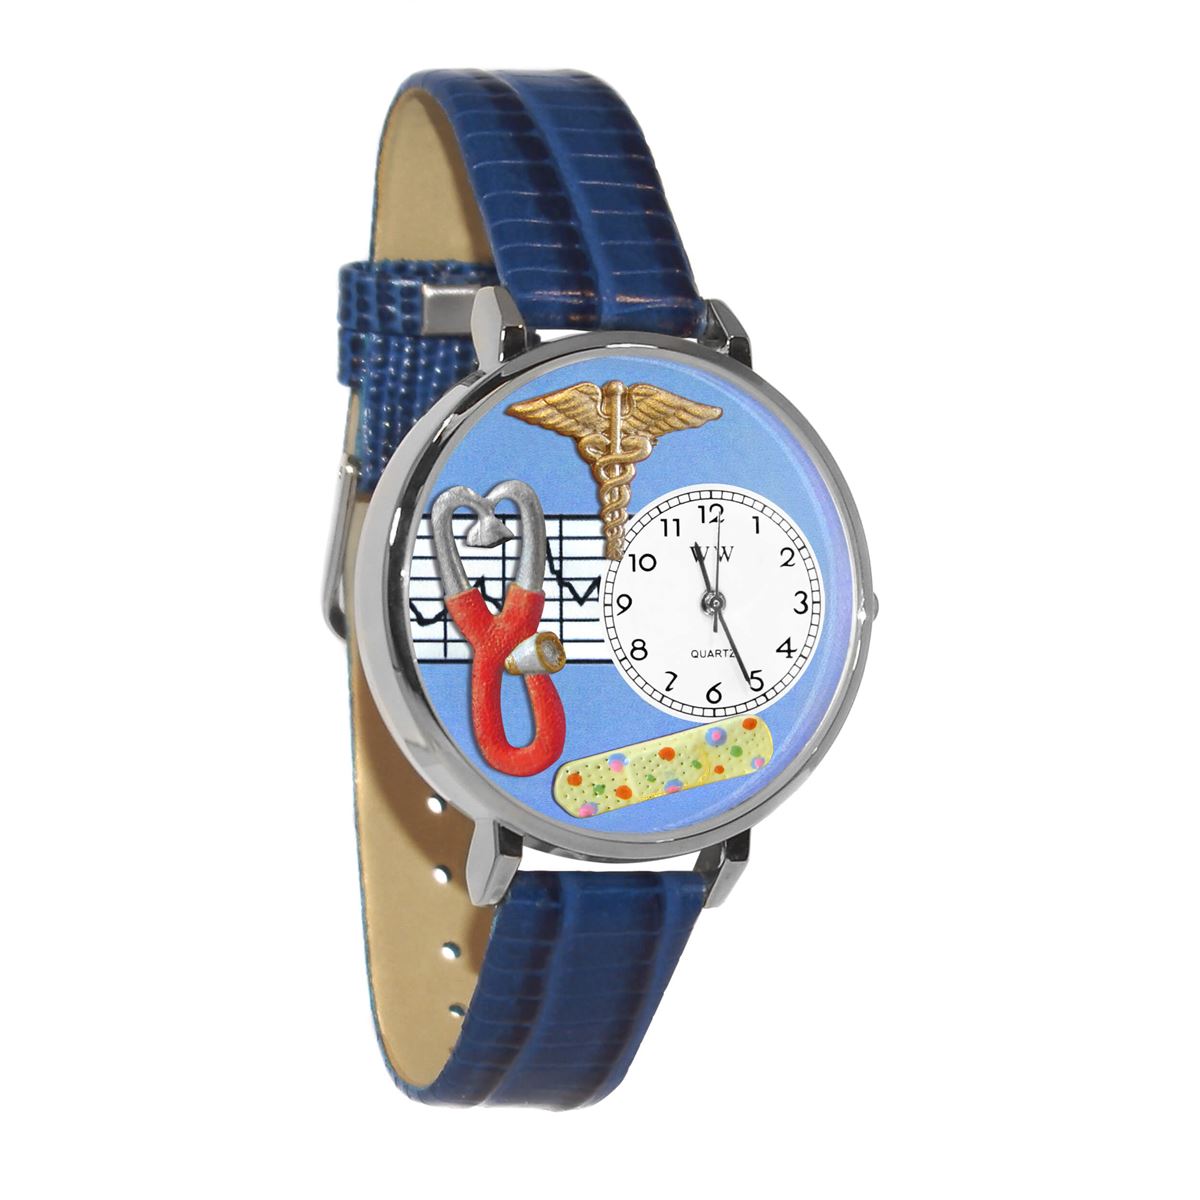 Whimsical Gifts | Nurse Stethoscope Blue 3D Watch Large Style | Handmade in USA | Professions Themed | Nurse | Novelty Unique Fun Miniatures Gift | Silver Finish Royal Blue Leather Watch Band